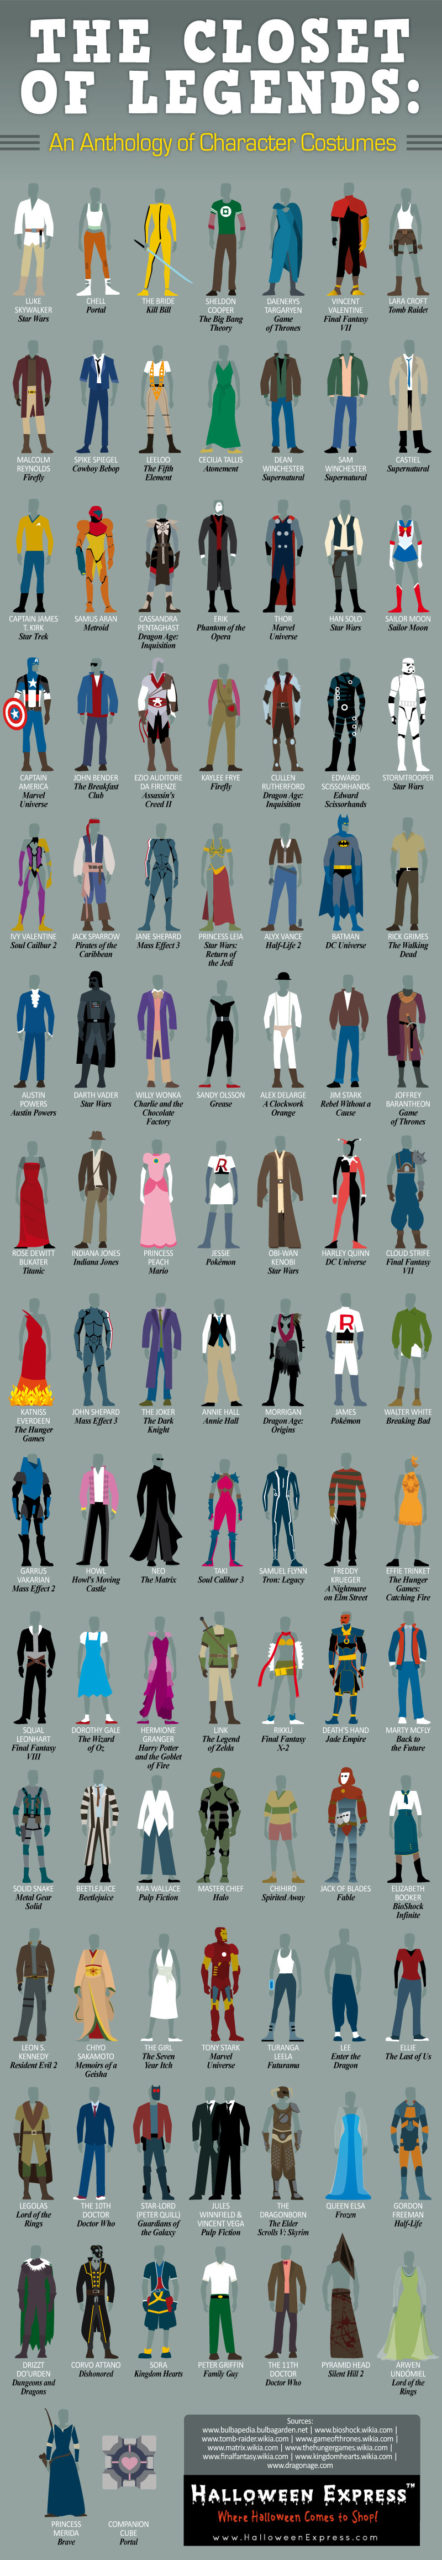 100 Iconic Costumes Of Popular Characters From Pop Culture